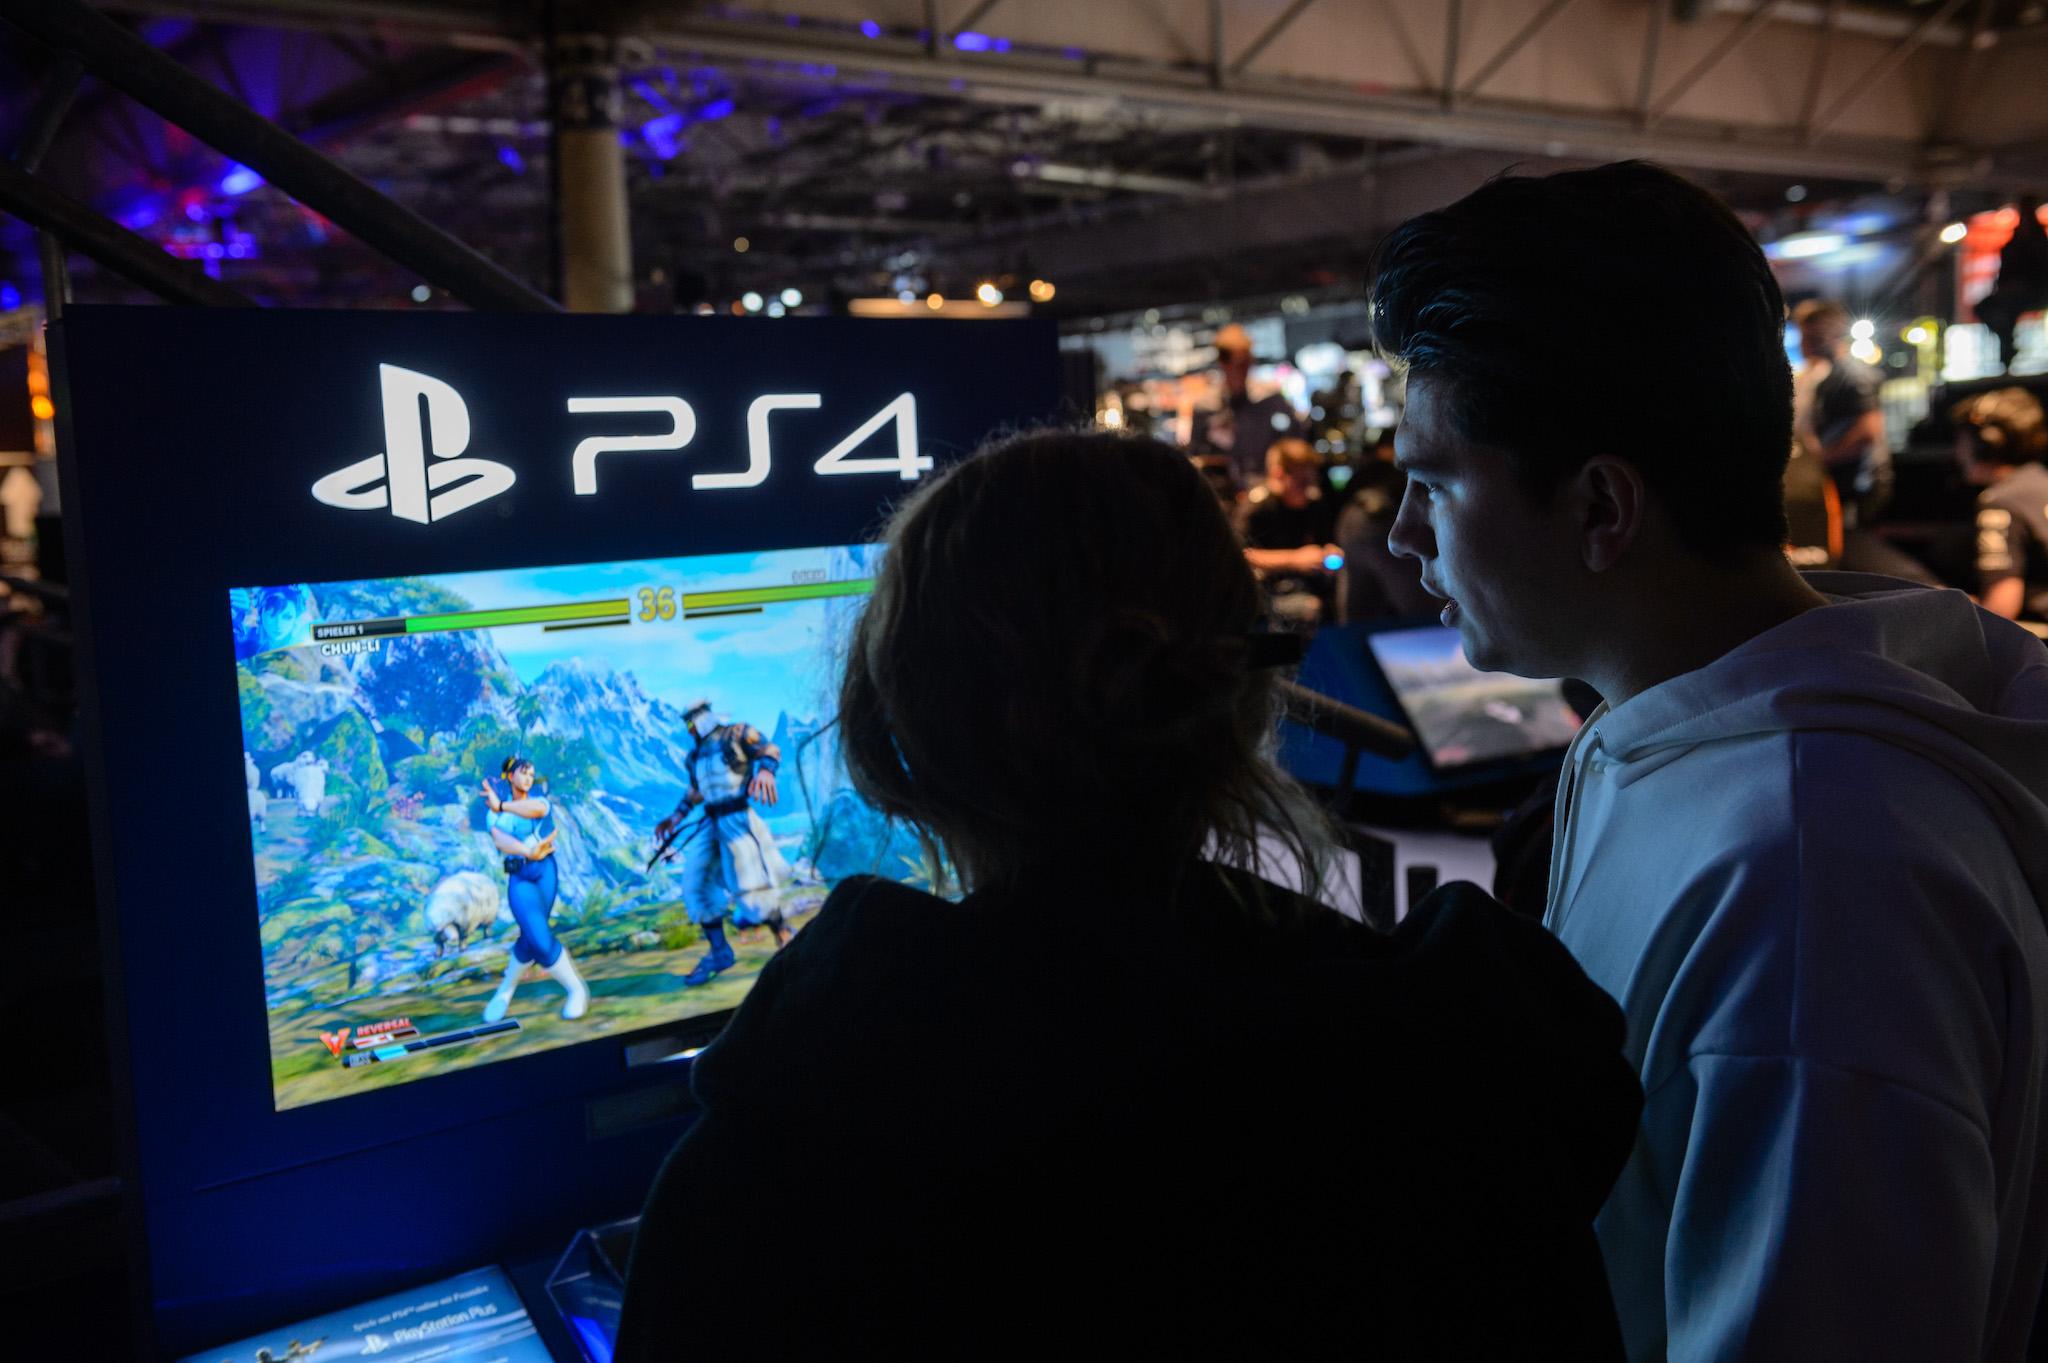 Participants play with the game console PS4 a video games at the 2018 DreamHack video gaming festival on January 27, 2018 in Leipzig, Germany